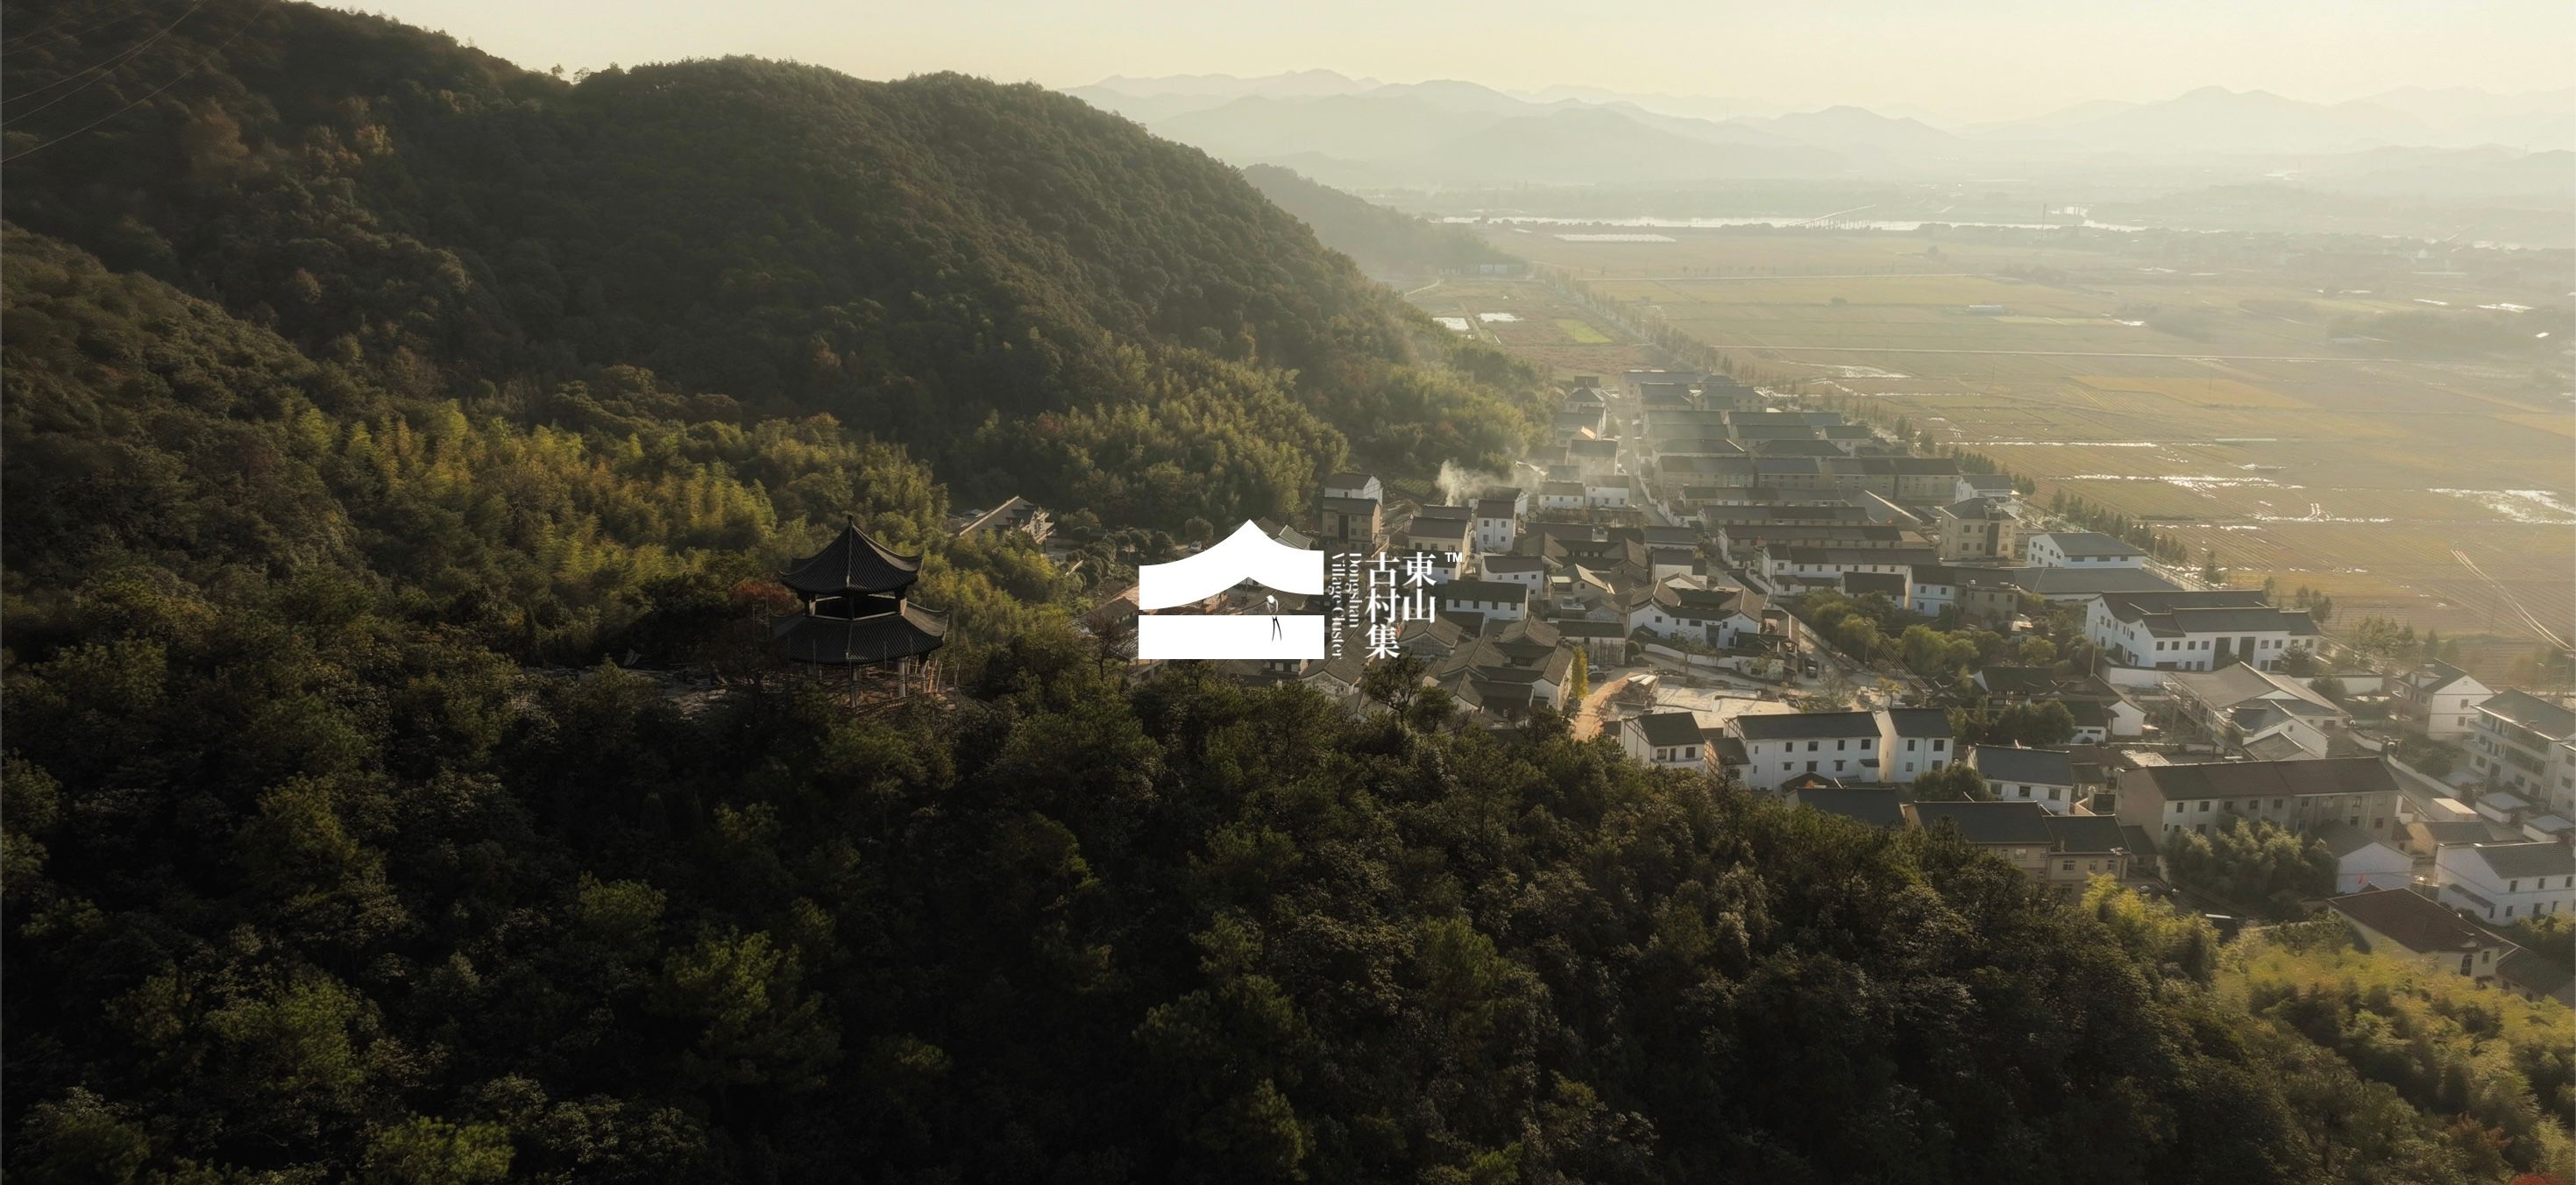 Cover Image for 东山古村集 Dongshan Village Cluster